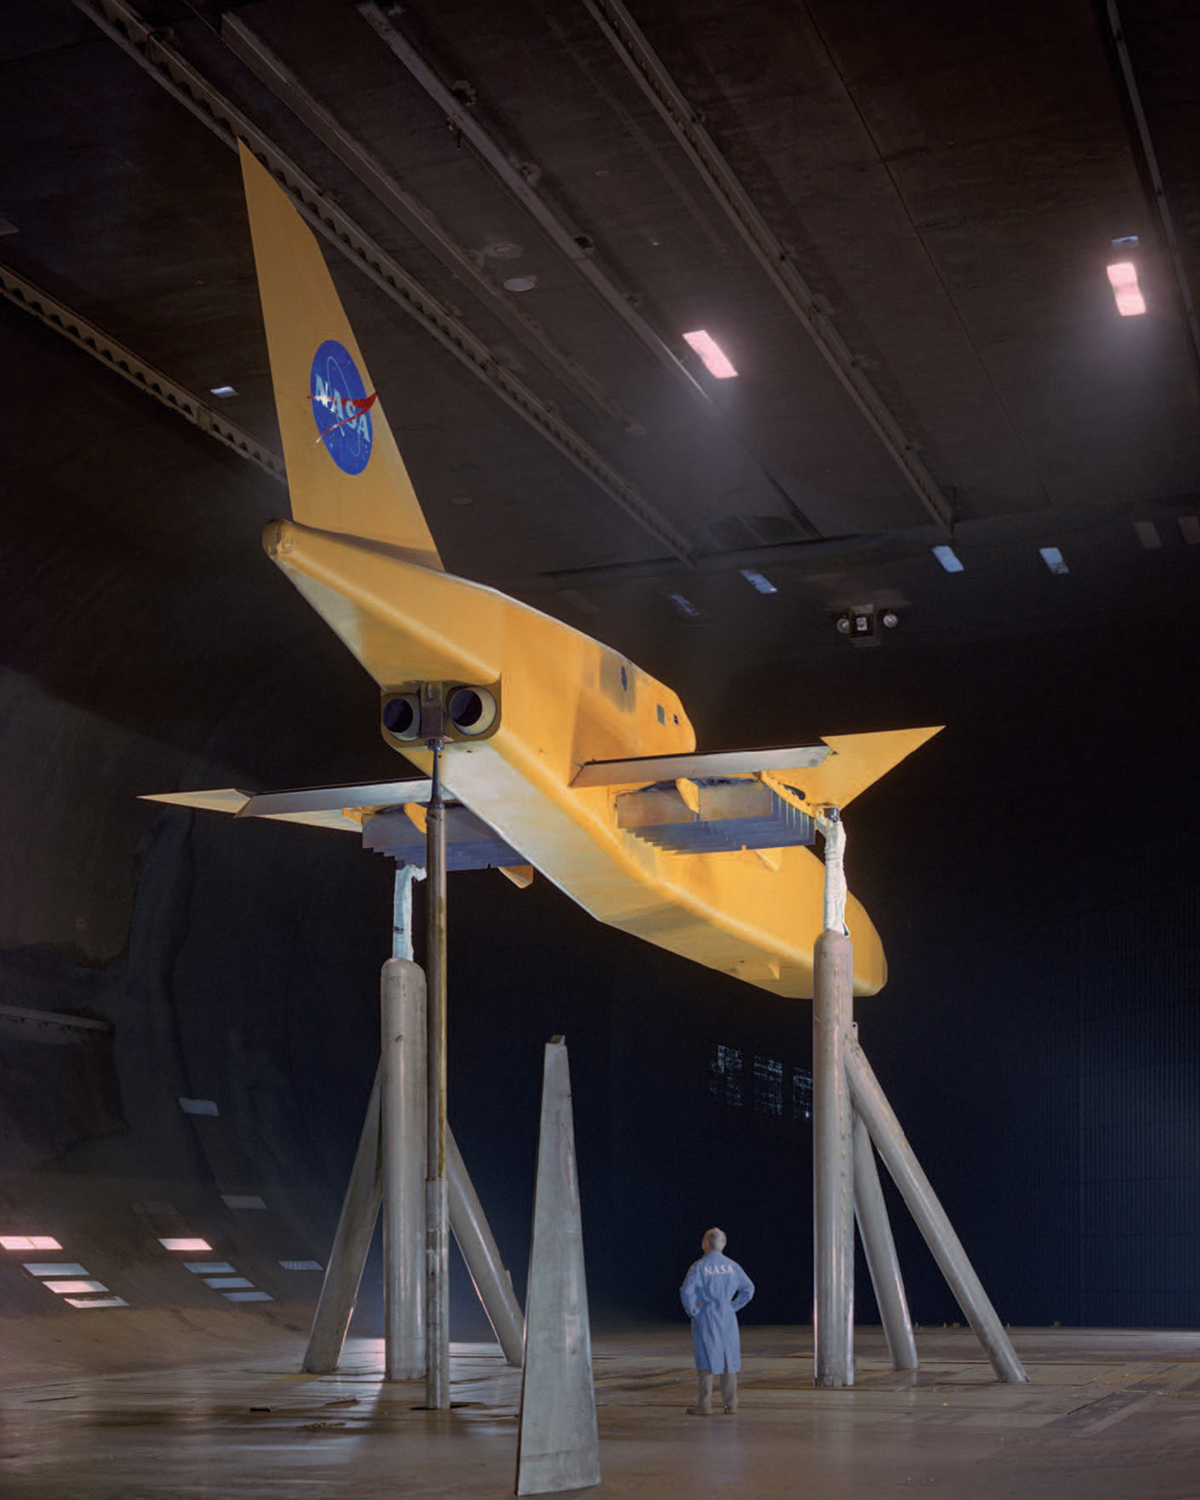 A man looks up at a yellow aircraft with short wings and a tail with NASA’s logo. The plane is raised above the floor on tall columns inside a wind tunnel.